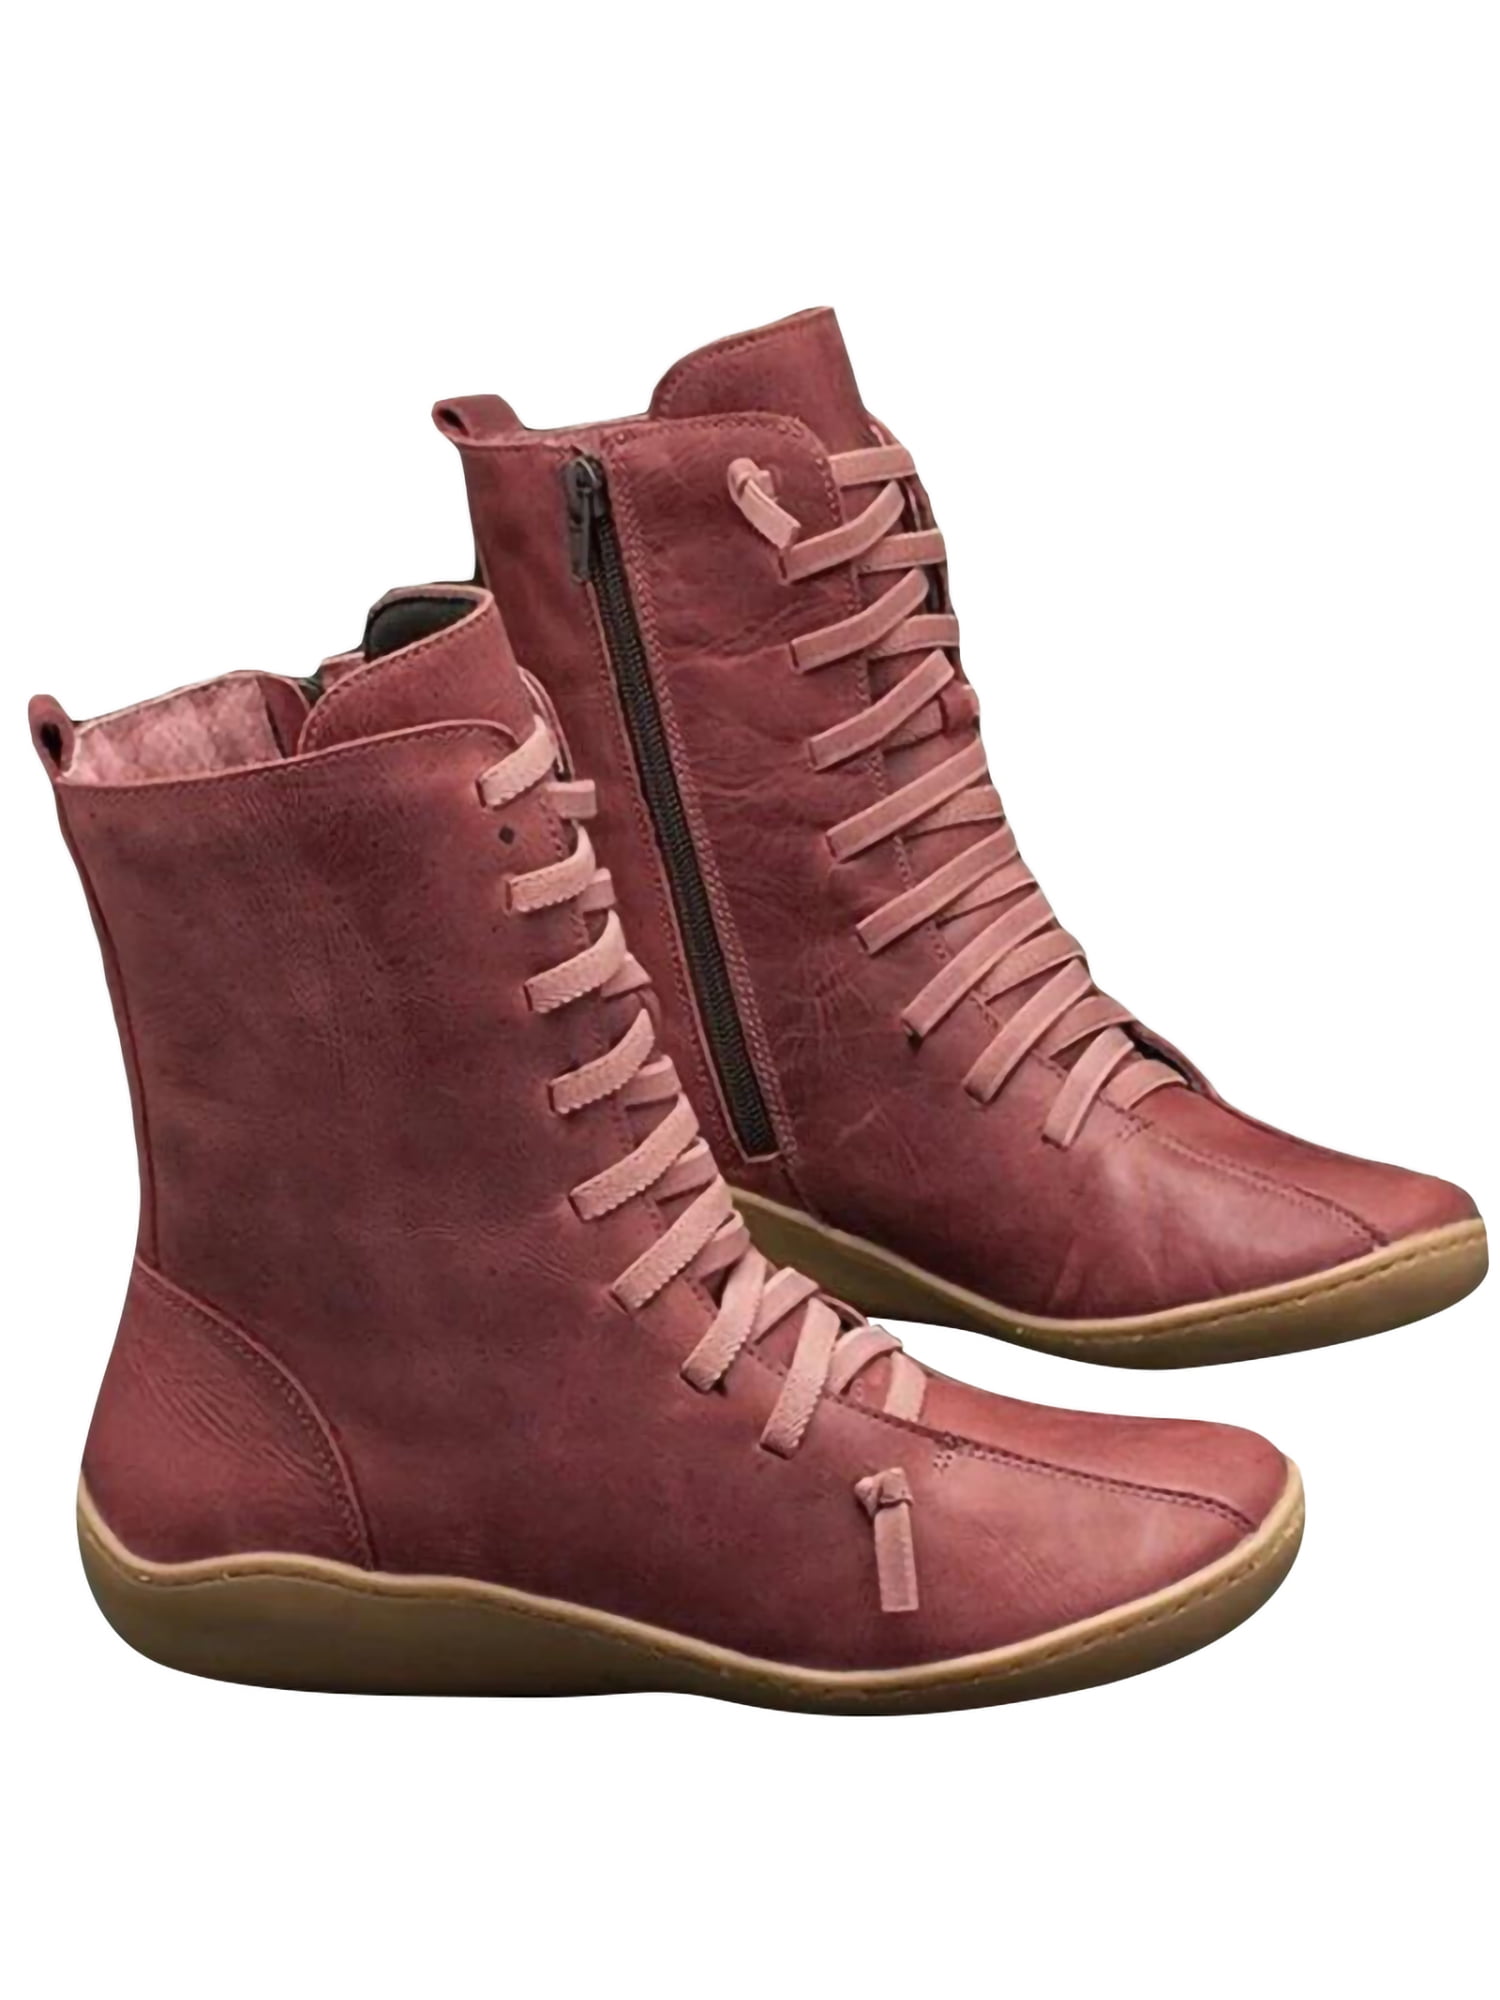 Details about   Fashion Women Ankle Boots Platform Round Toe Lace Up Wedges Boots Shoes US4-15